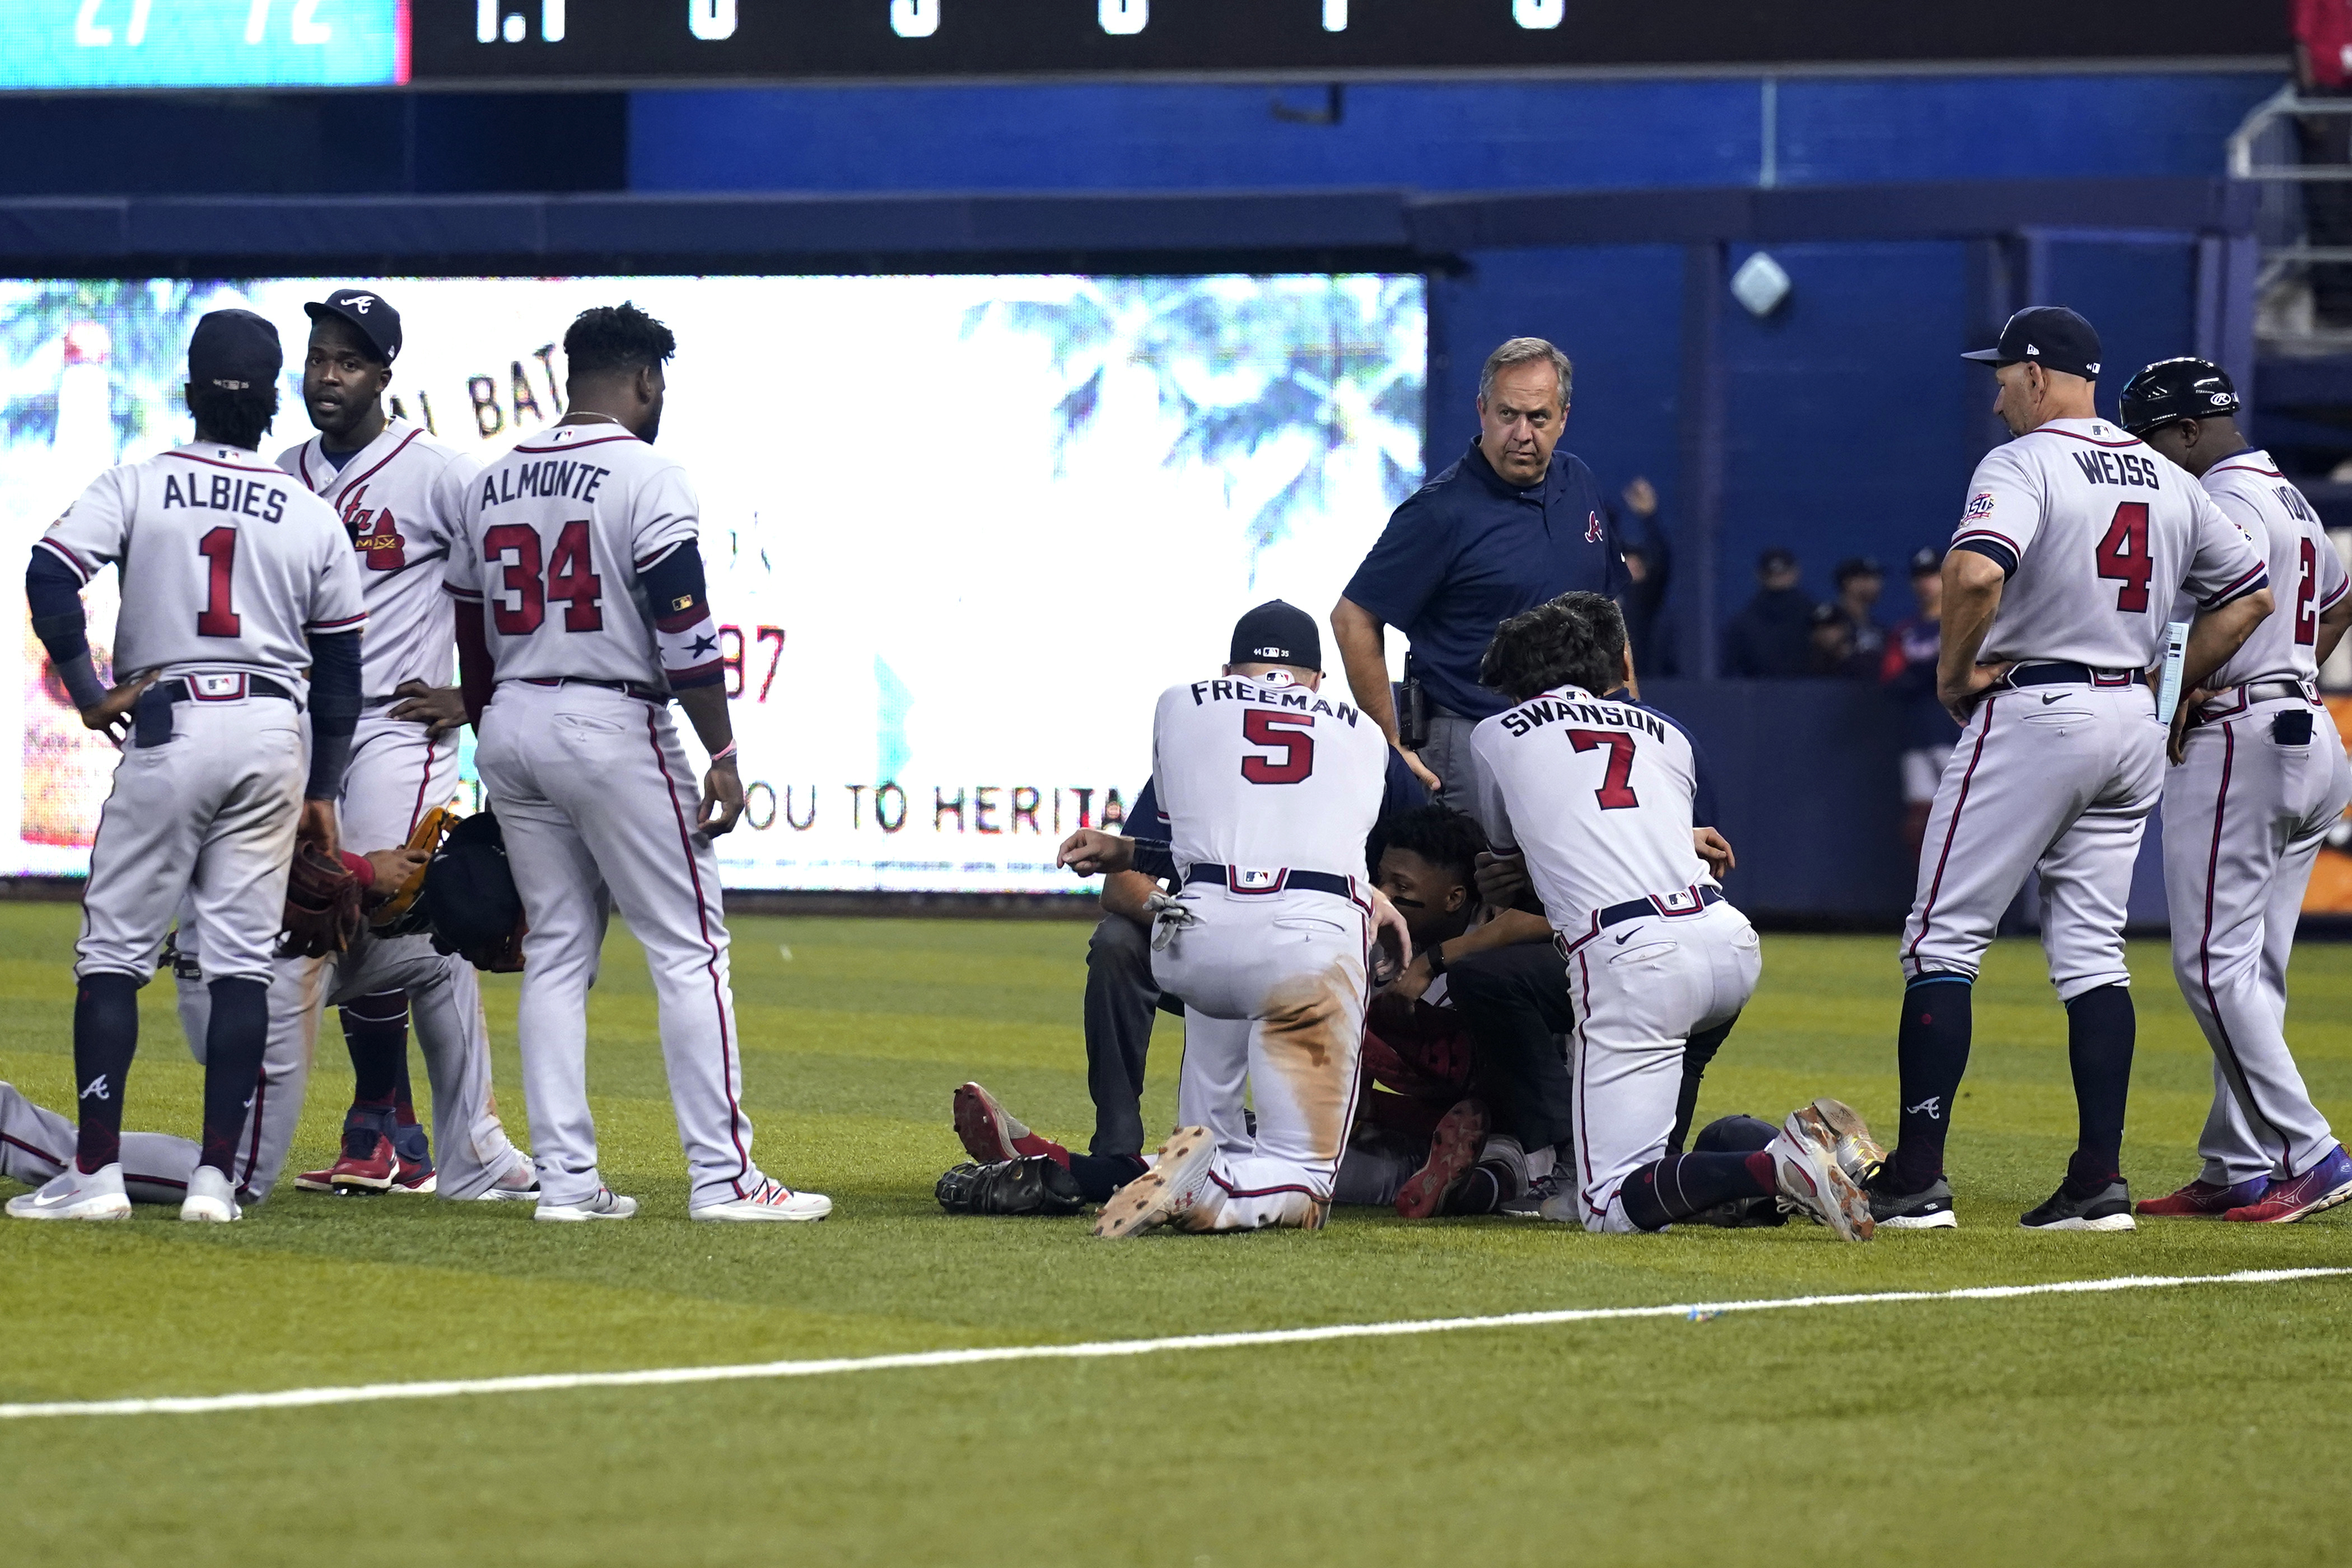 Braves: Injury updates for Ronald Acuña Jr. and Max Fried